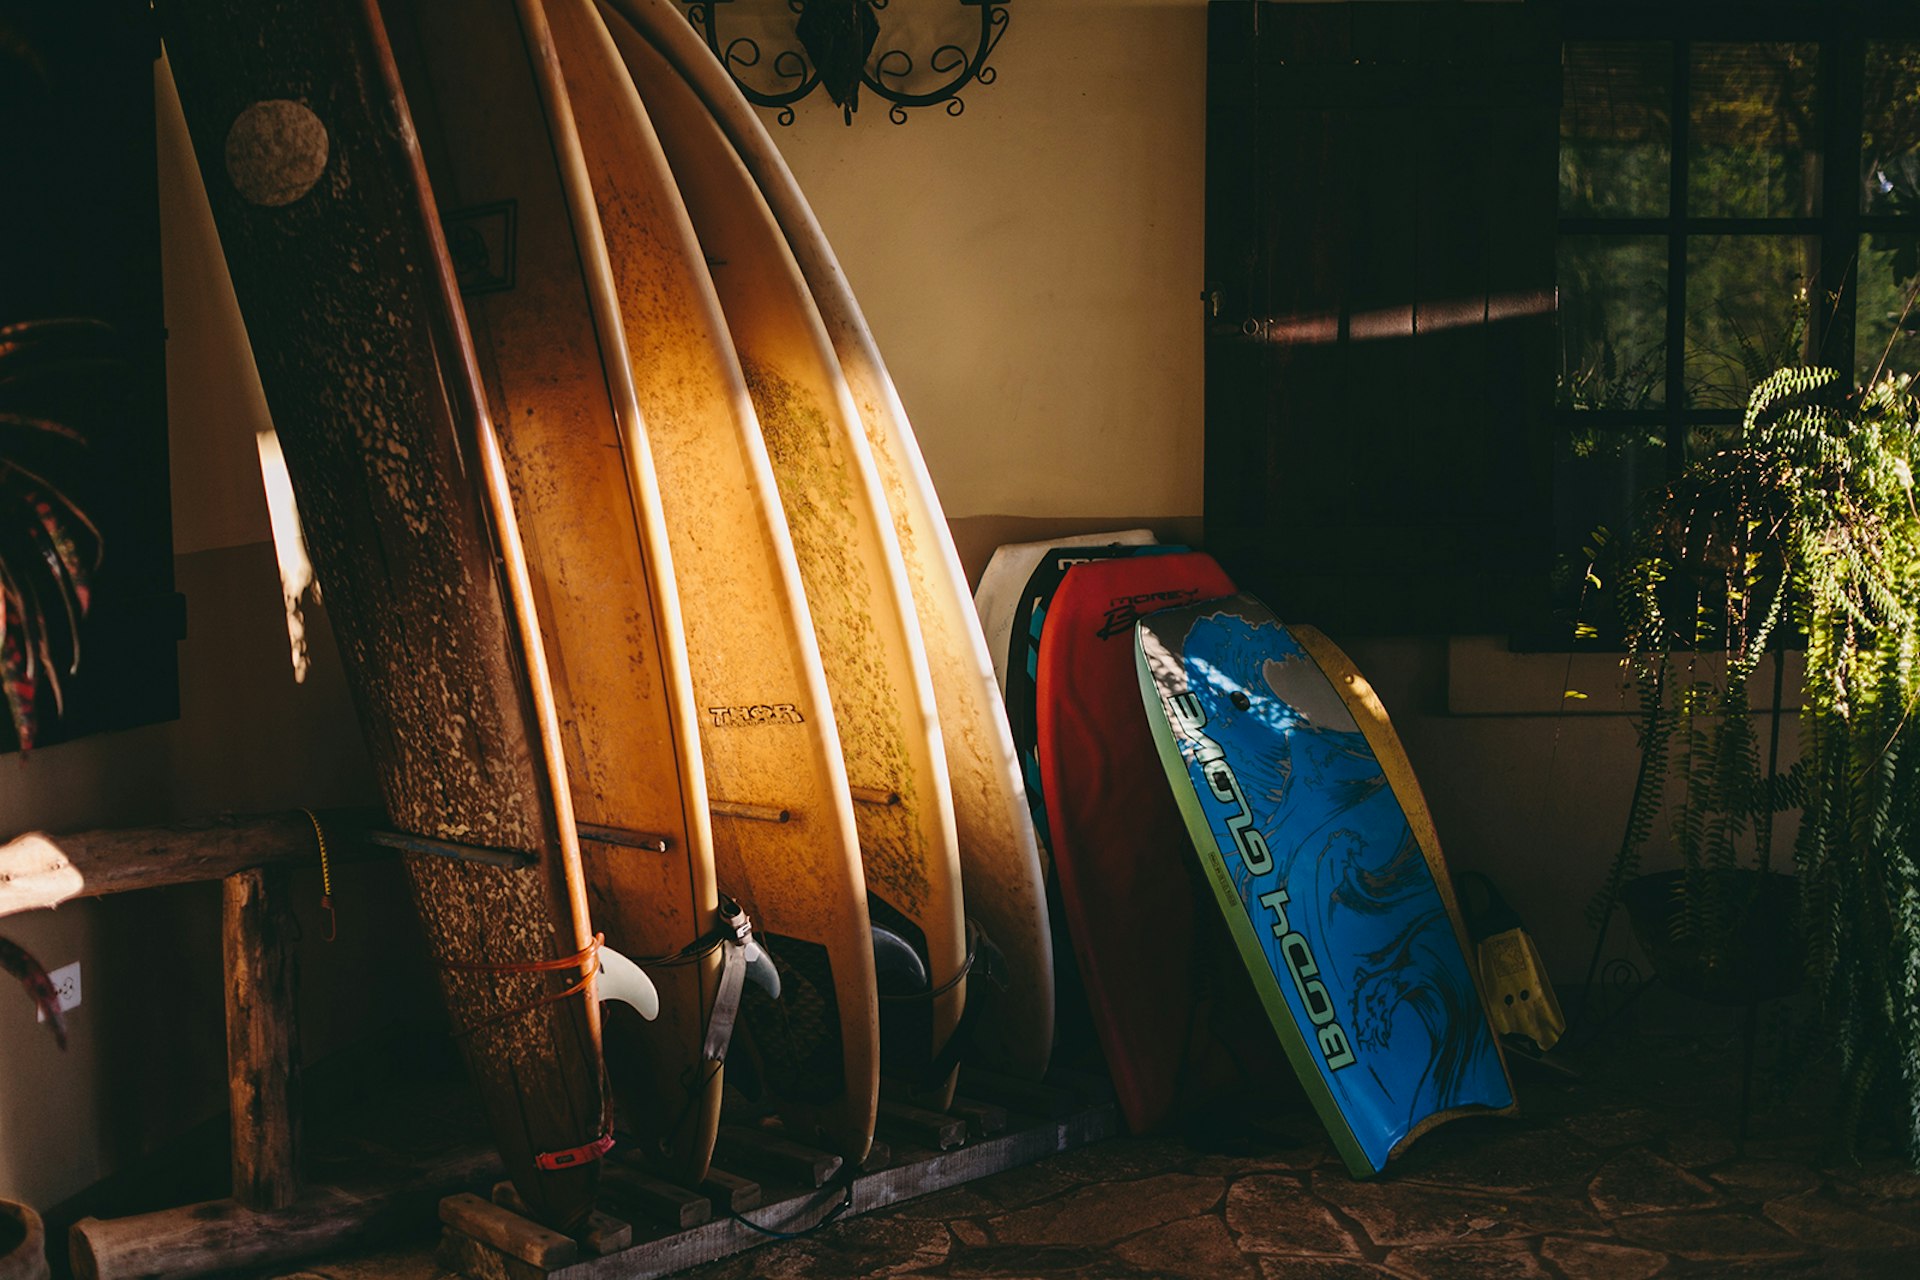 Features - Surfboards put away at the end of the day